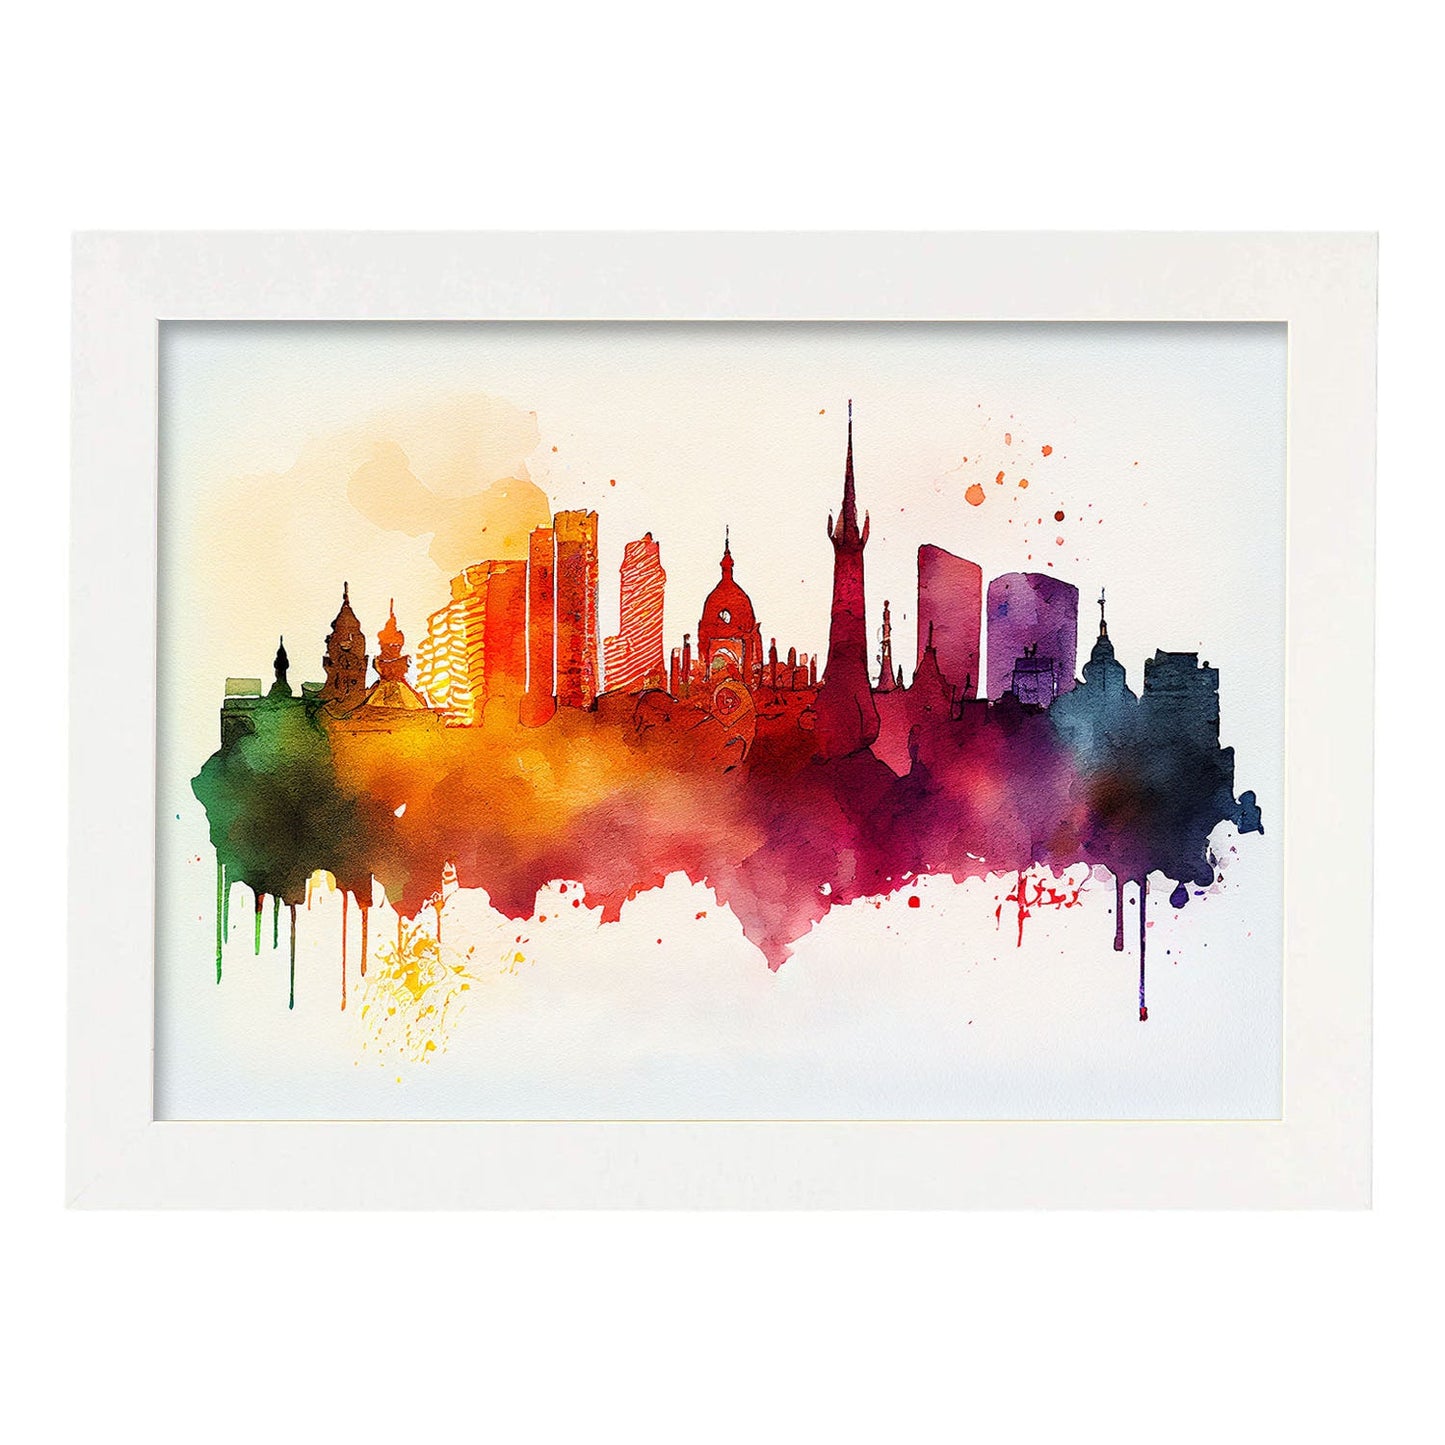 Nacnic watercolor of a skyline of the city of Madrid_2. Aesthetic Wall Art Prints for Bedroom or Living Room Design.-Artwork-Nacnic-A4-Marco Blanco-Nacnic Estudio SL